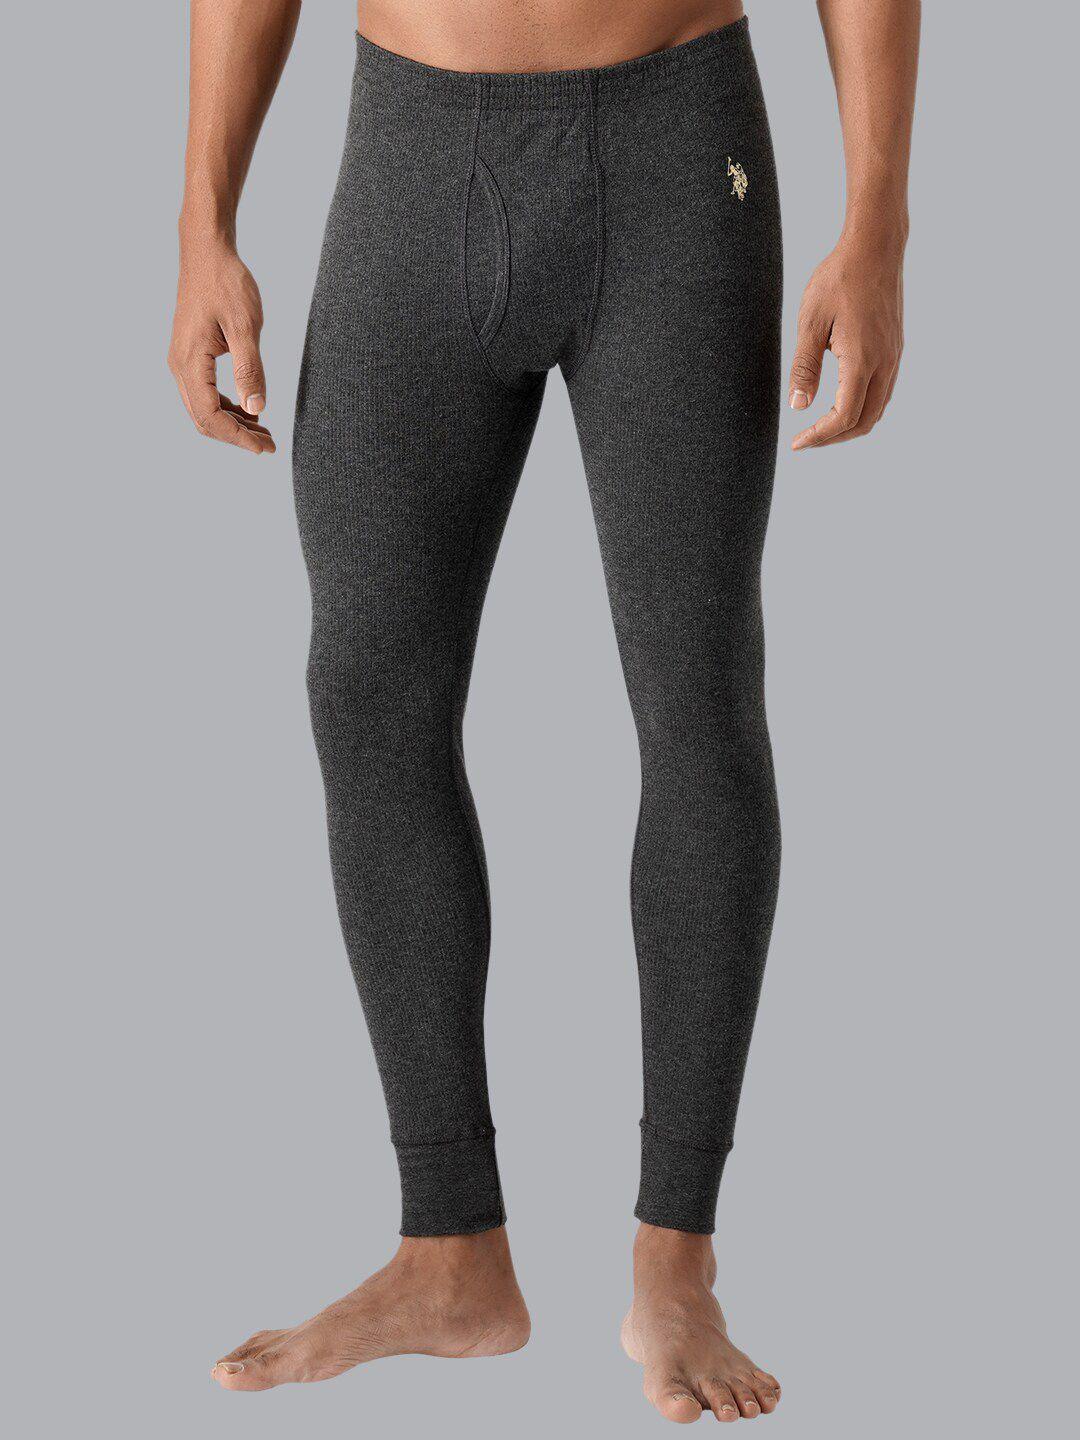 u.s. polo assn. men grey solid cotton thermal bottoms